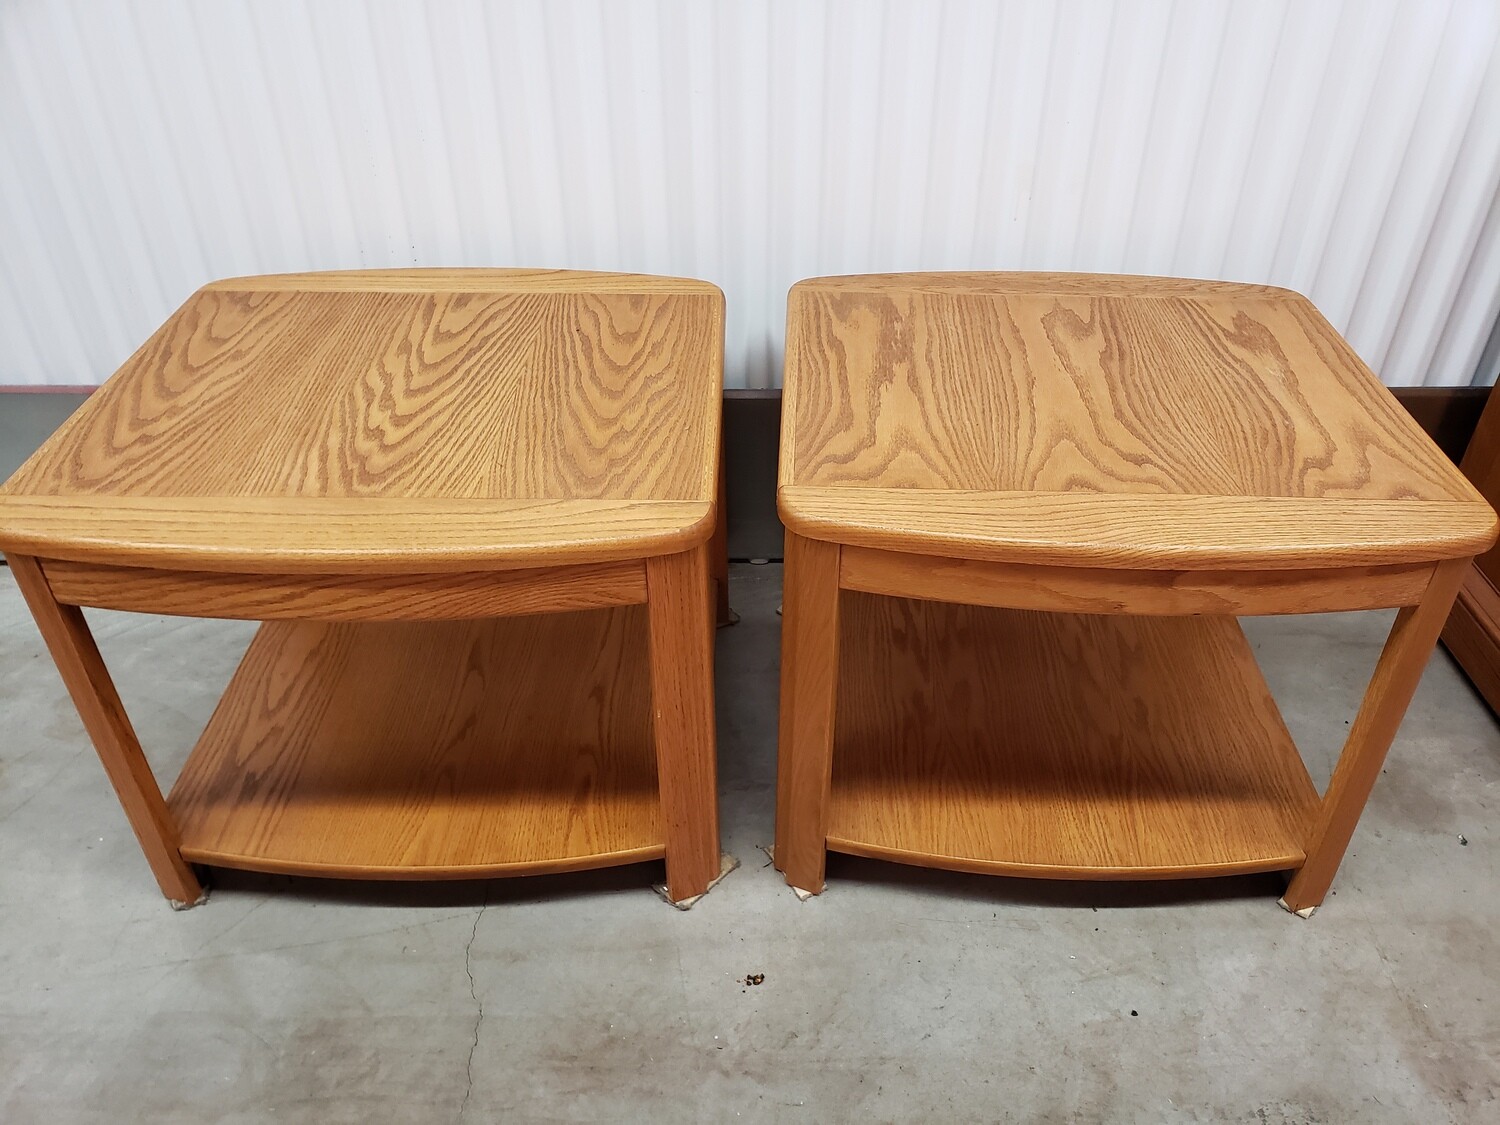 Matching Oak End Tables, very nice! #2118